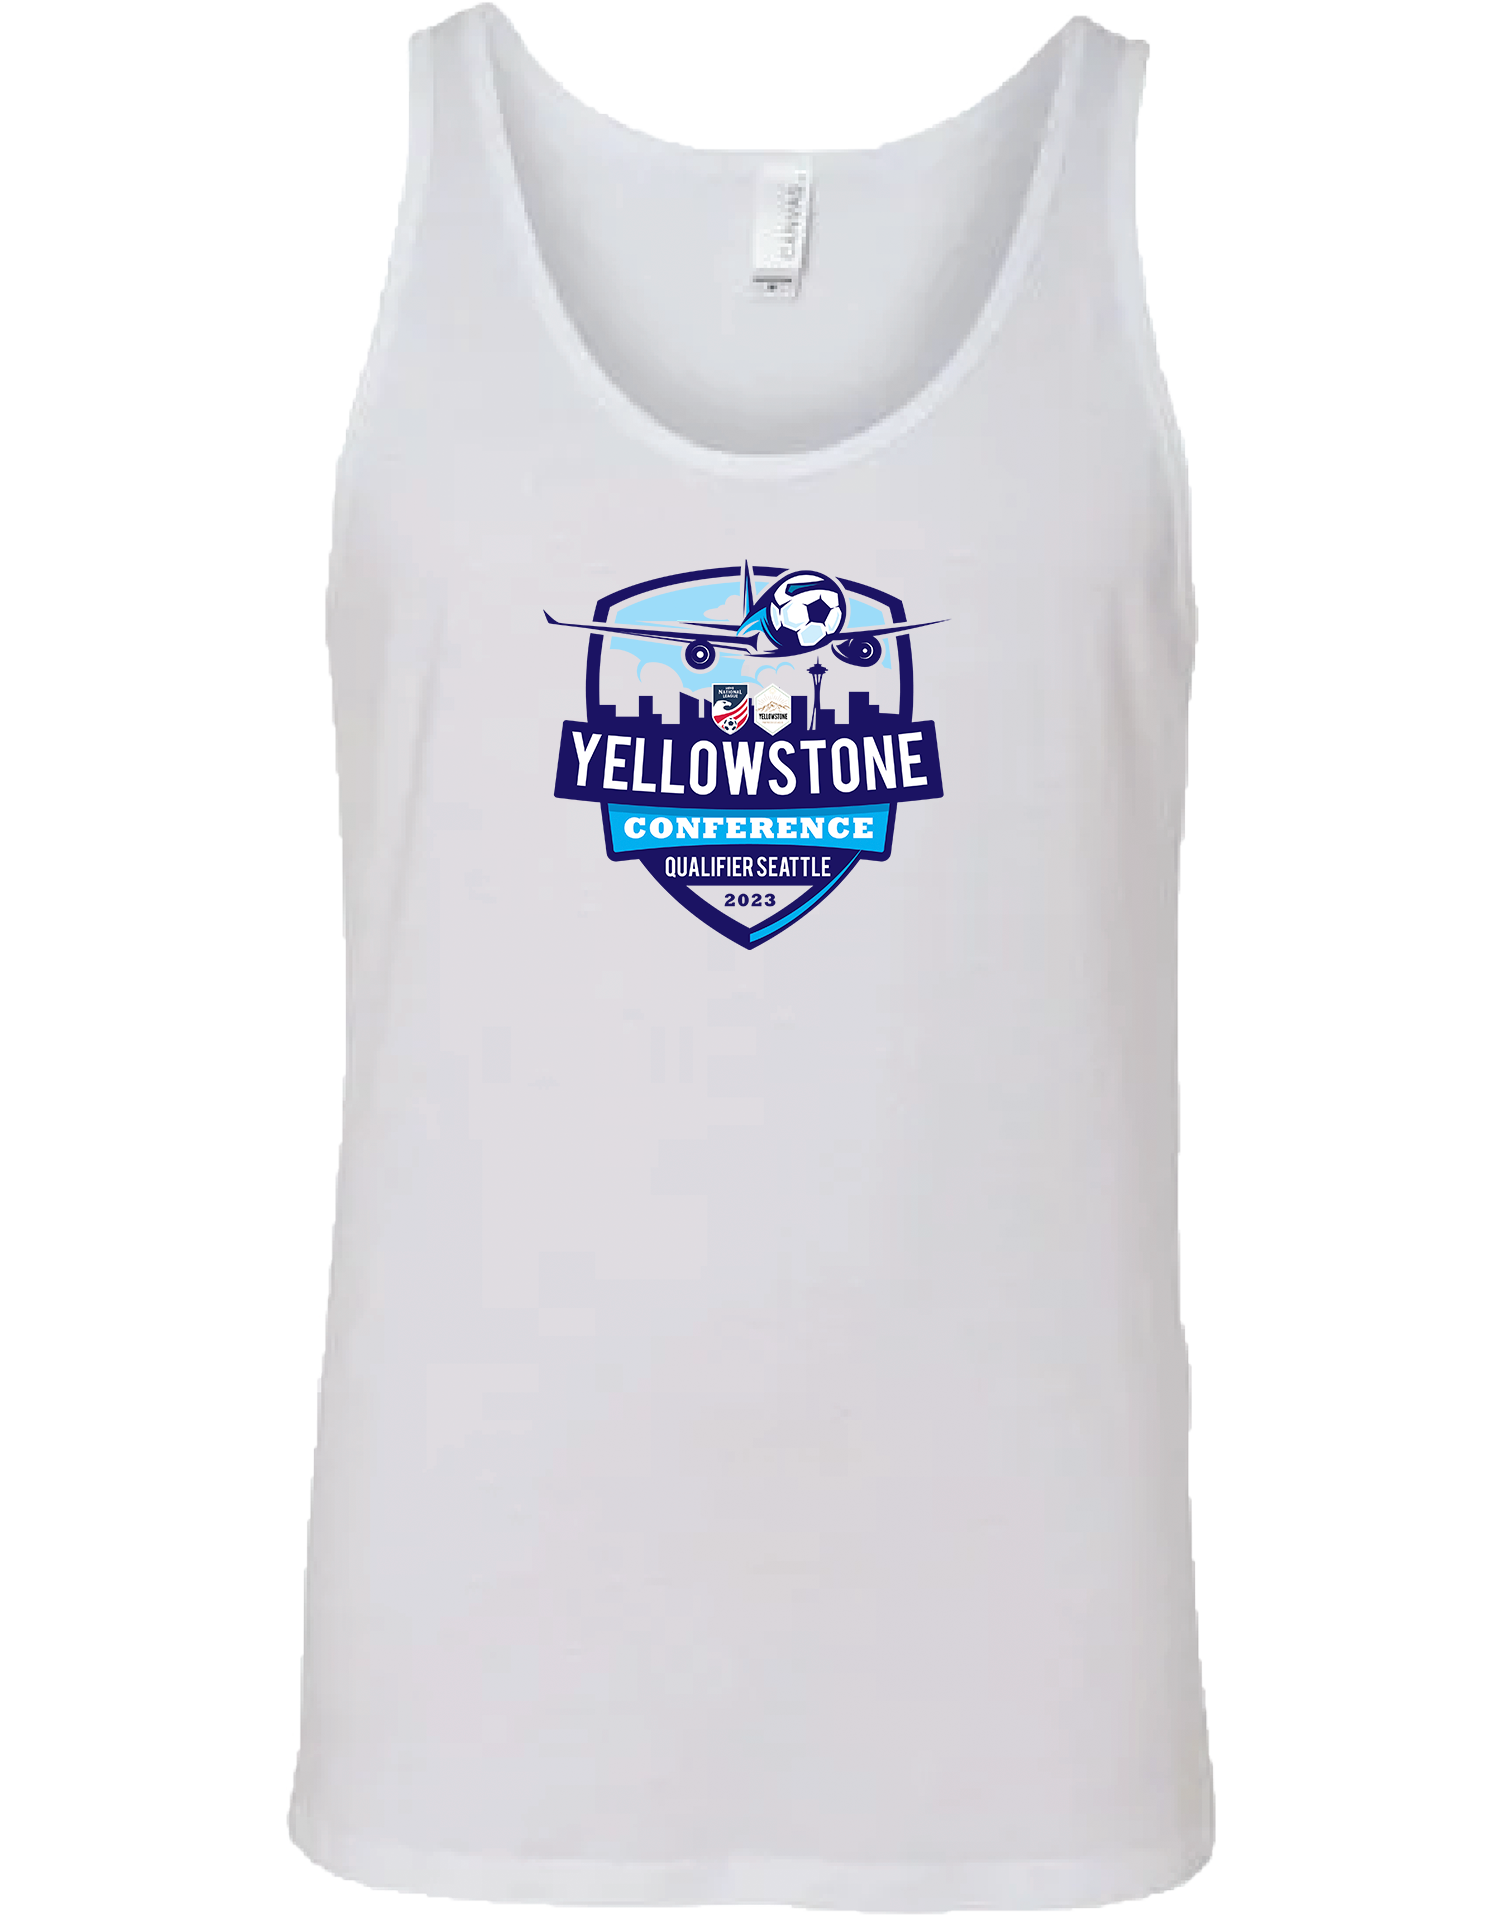 TANK TOP - 2023 Yellowstone Conference Qualifier Seattle